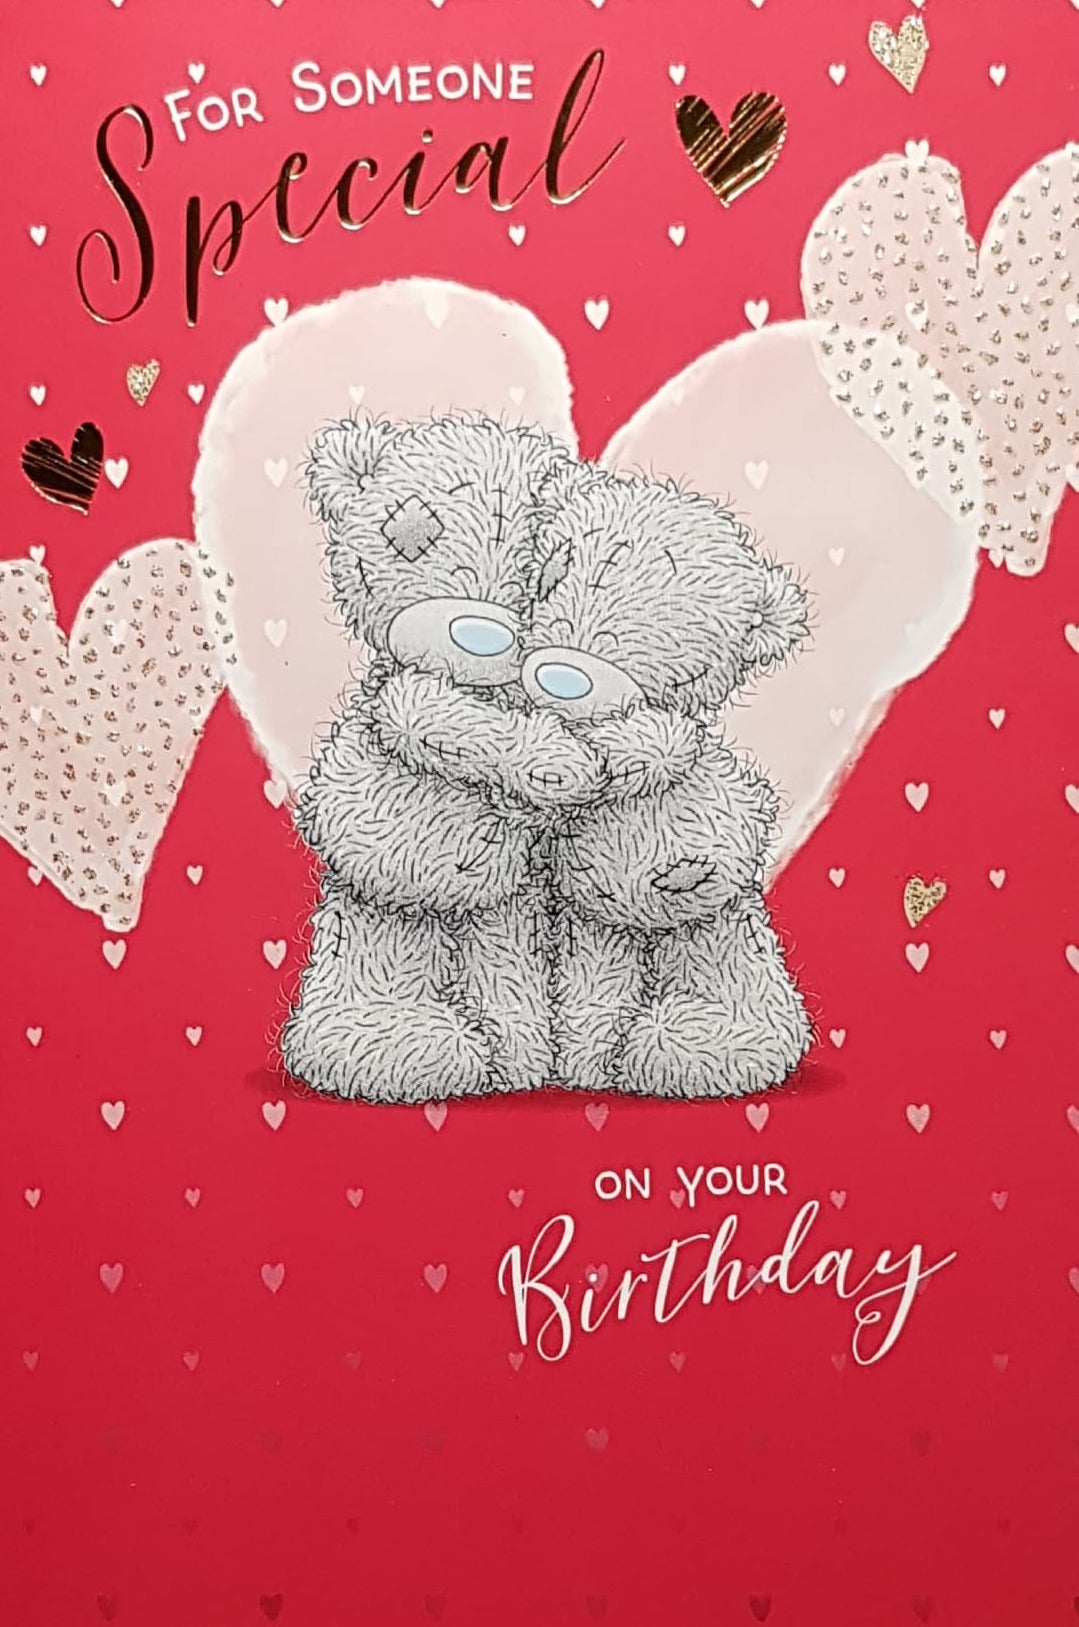 Birthday Card - Someone Special / Teddies Hugging & Pink Hearts On Red Background